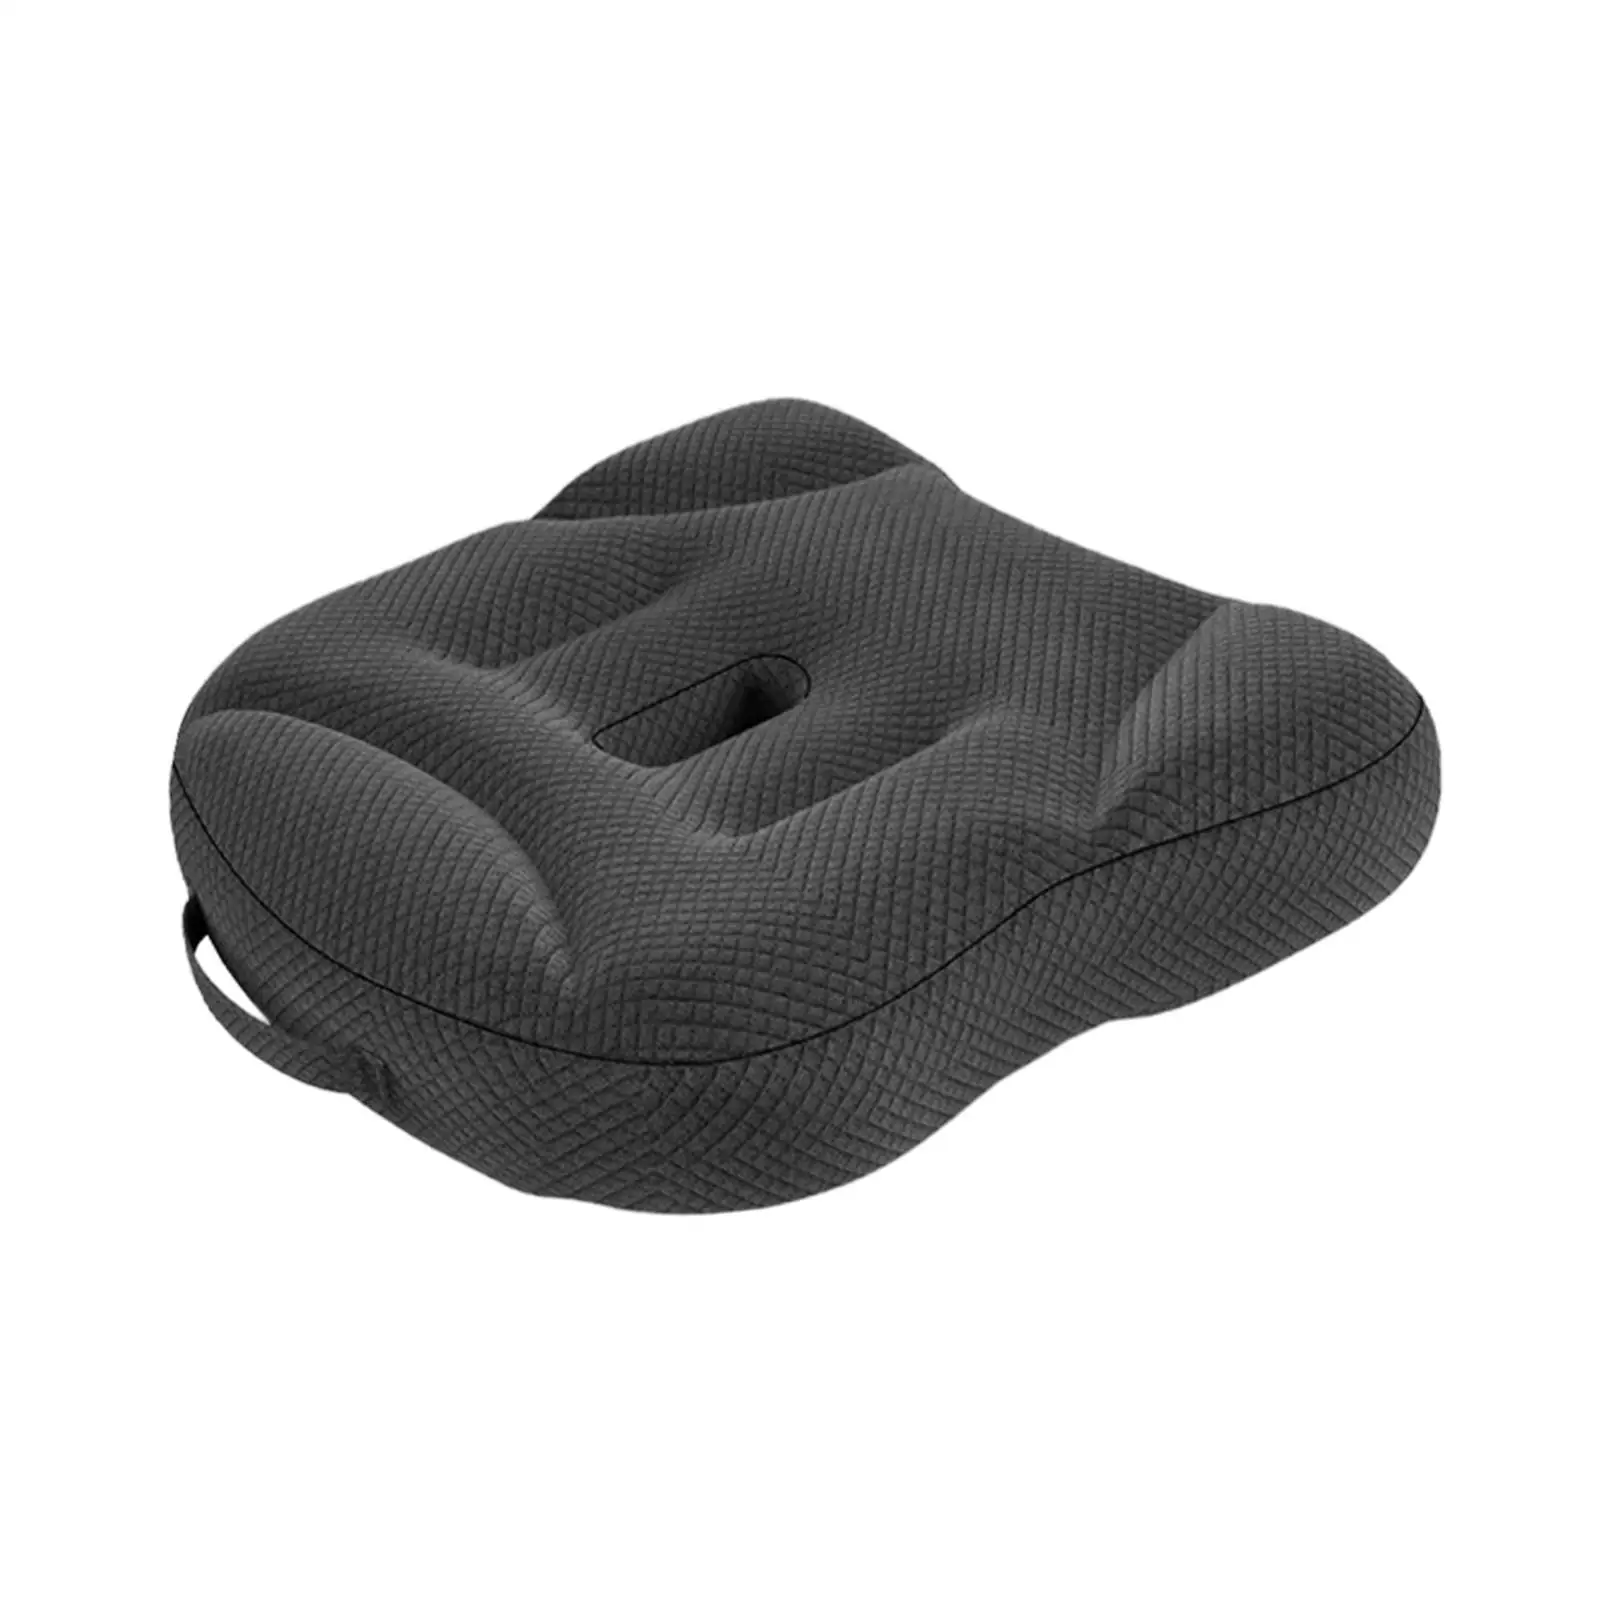 Seat Cushion Breathable Non Slip Comfortable for Office Desk Chair Cushion Chair Pad for Car Home Driving Traveling Office